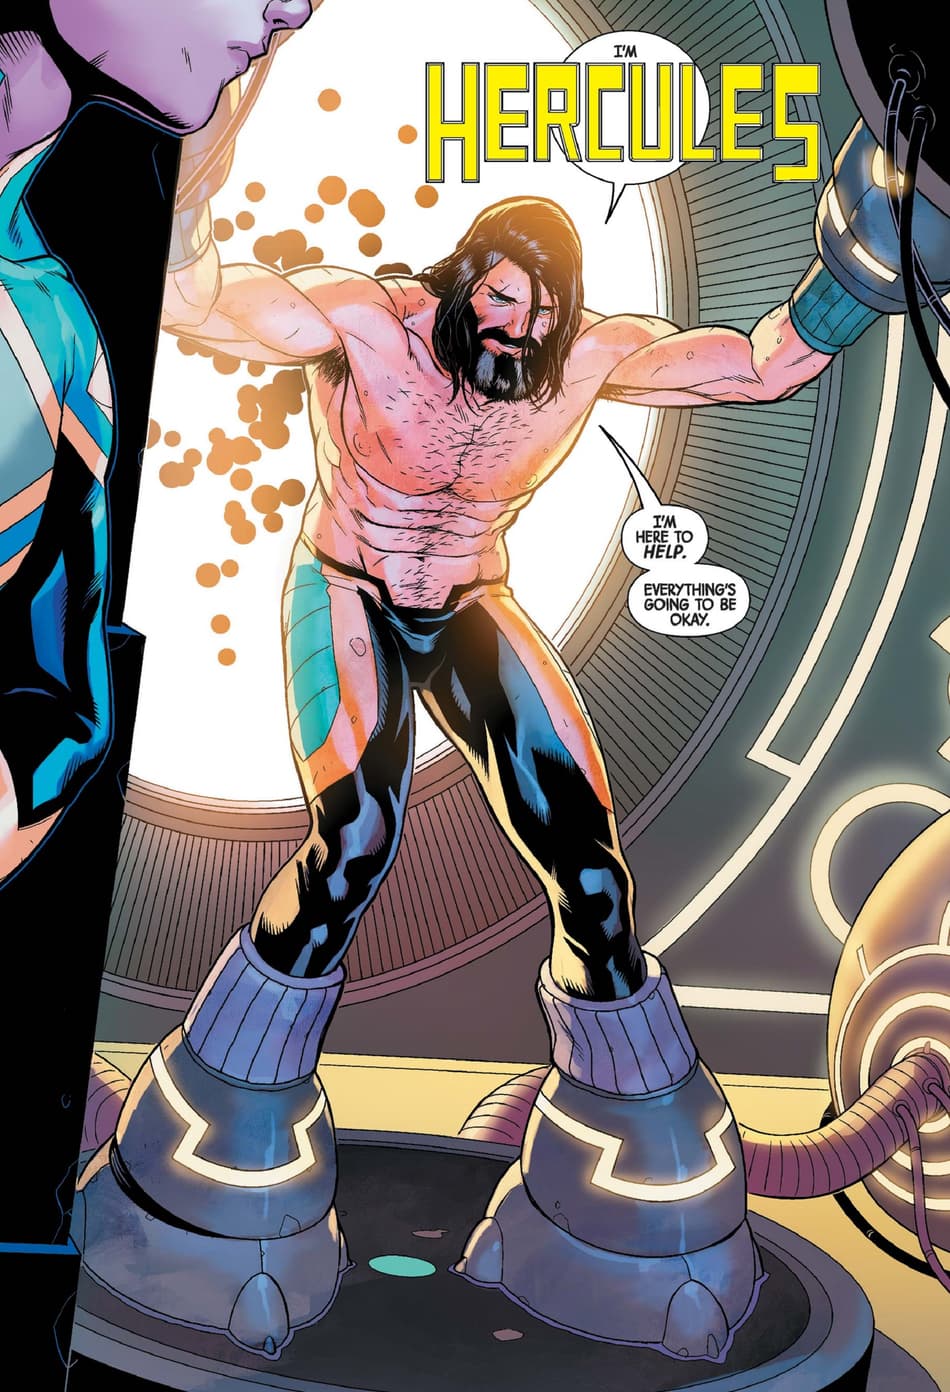 Hercules is imprisoned in GUARDIANS OF THE GALAXY (2020) #1.